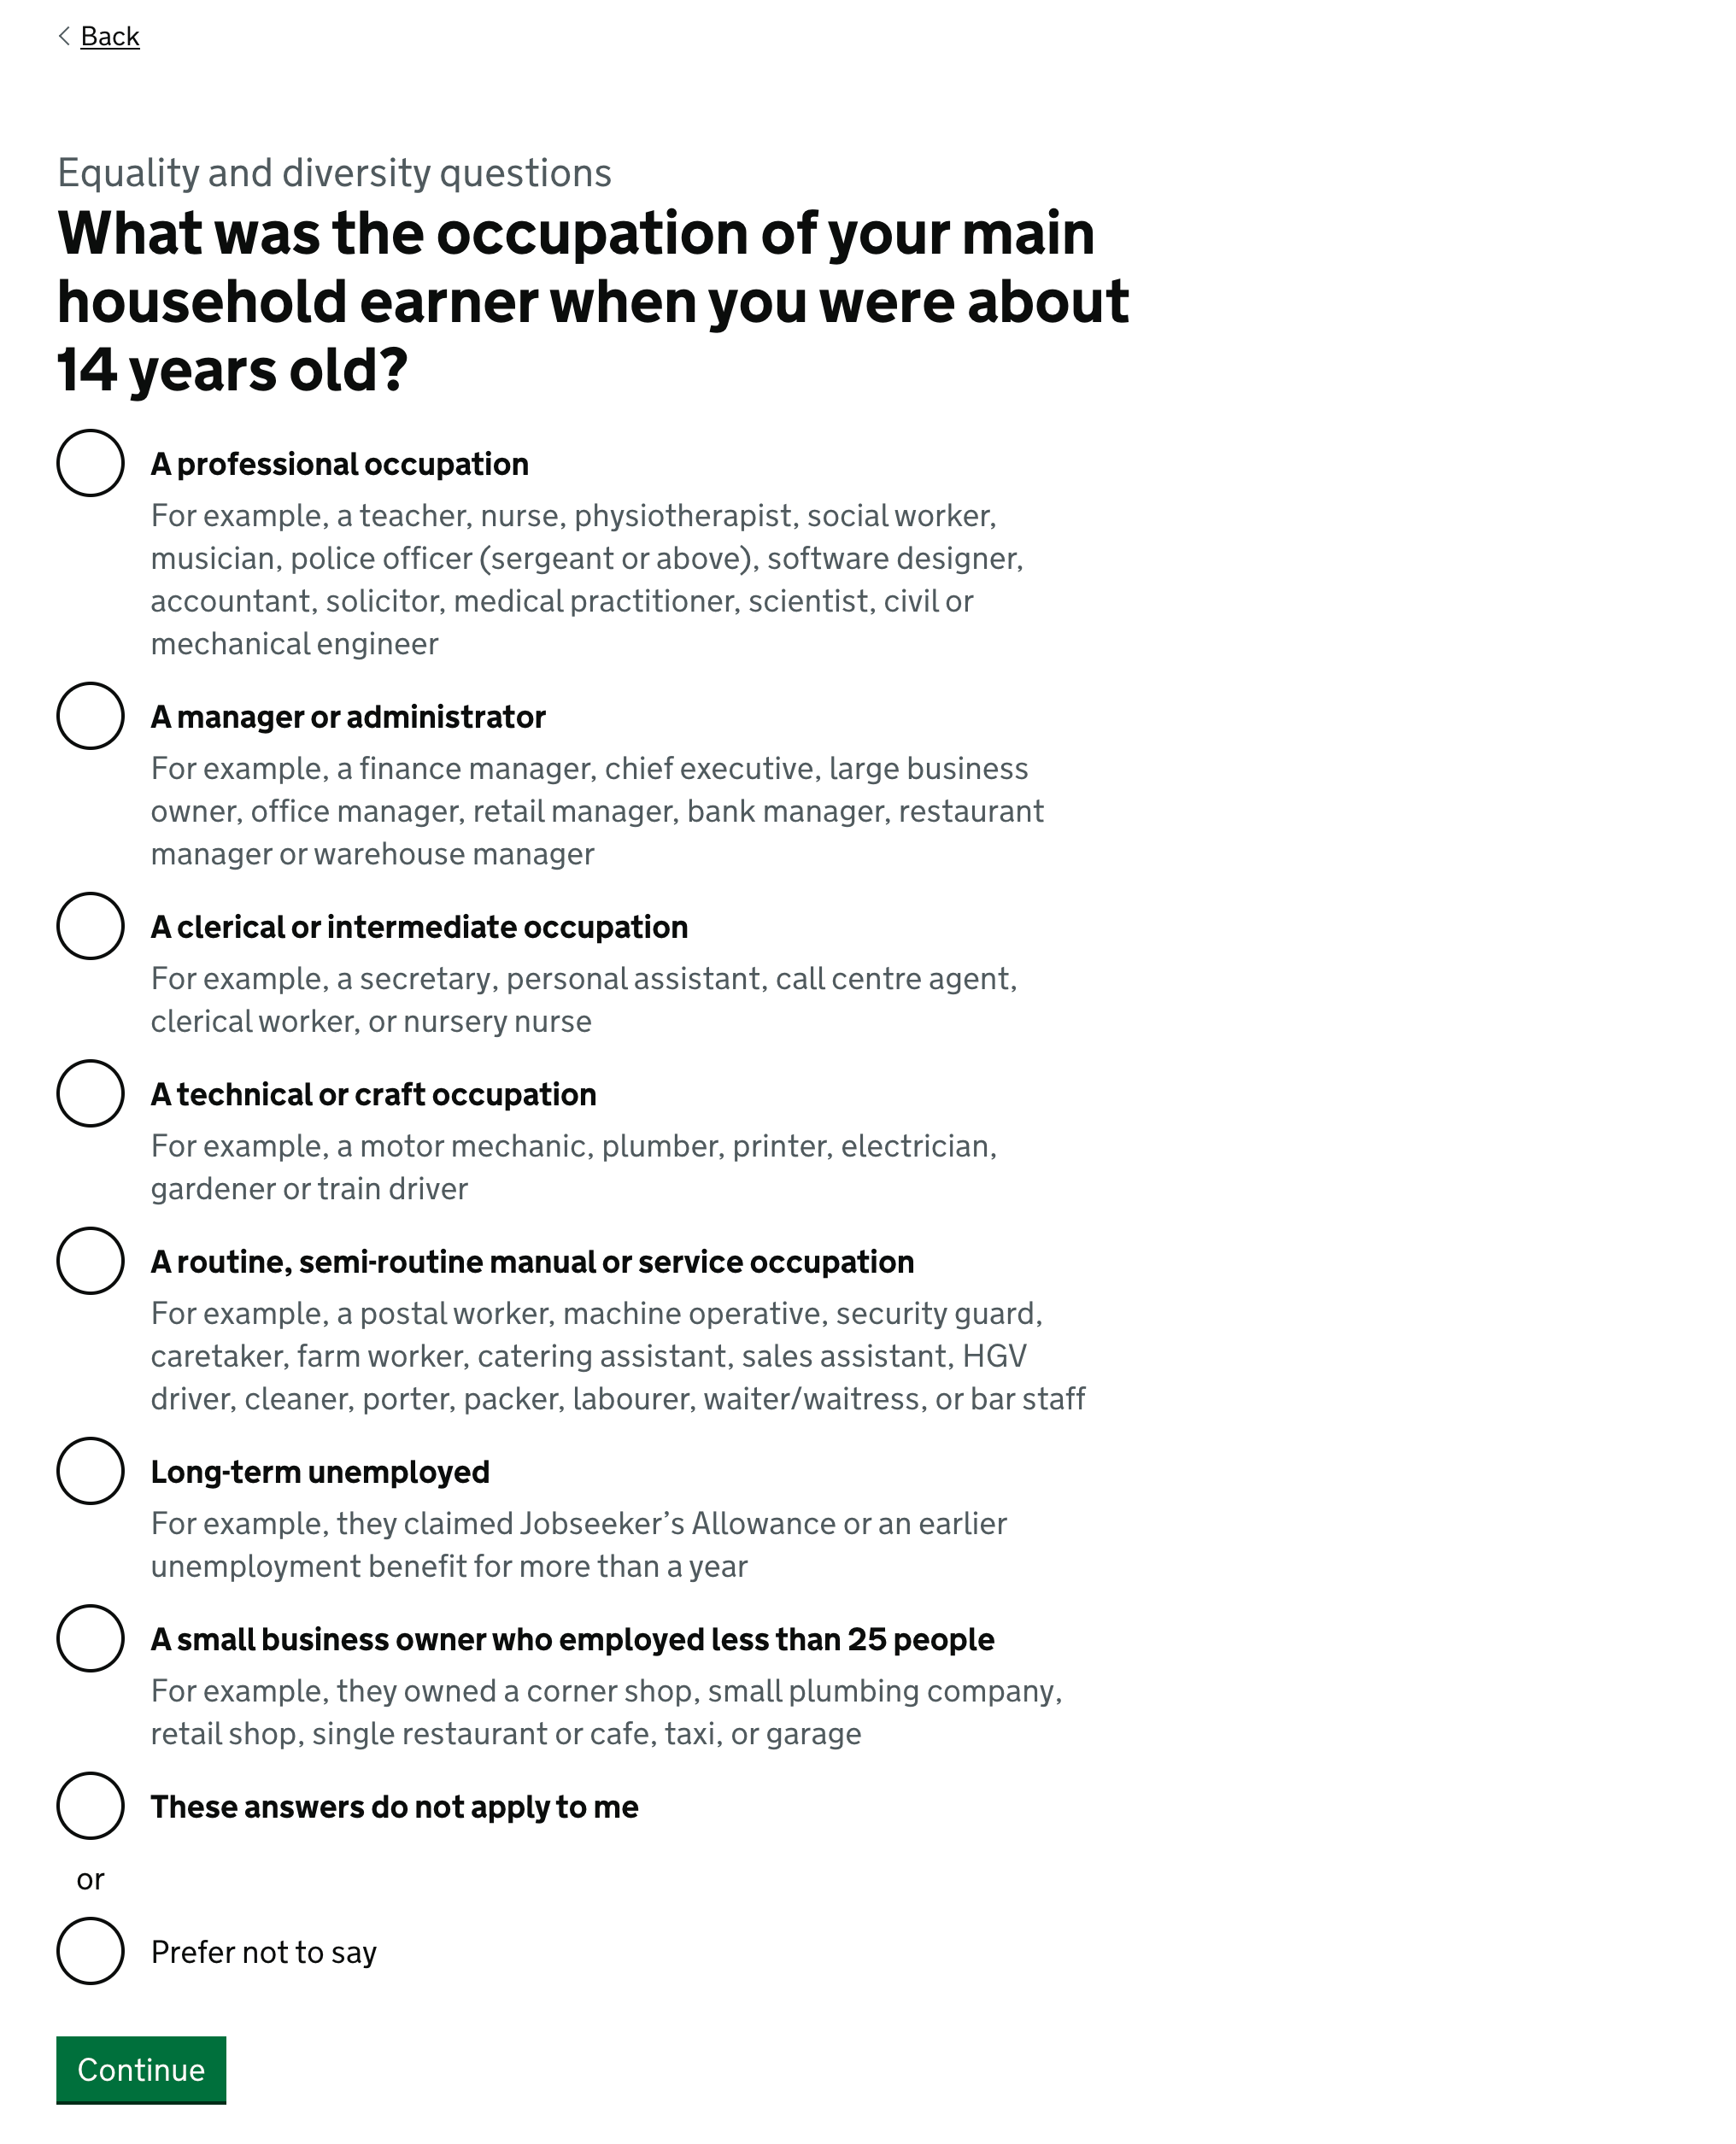 Screenshot showing a page with the title "What was the occupation of your main household earner when you were about 14 years old?". There are 8 options, plus 2 additional options of "These answers do not apply to me" and "Prefer not to say". The 8 options are: A professional occupation, A manager or administrator, A clerical or intermediate occupation, A technical or craft occupation, A routine, semi-routine manual or service occupation, Long-term unemployed, or A small business owned who employed less than 25 people. Each option has numberas examples beneath it.